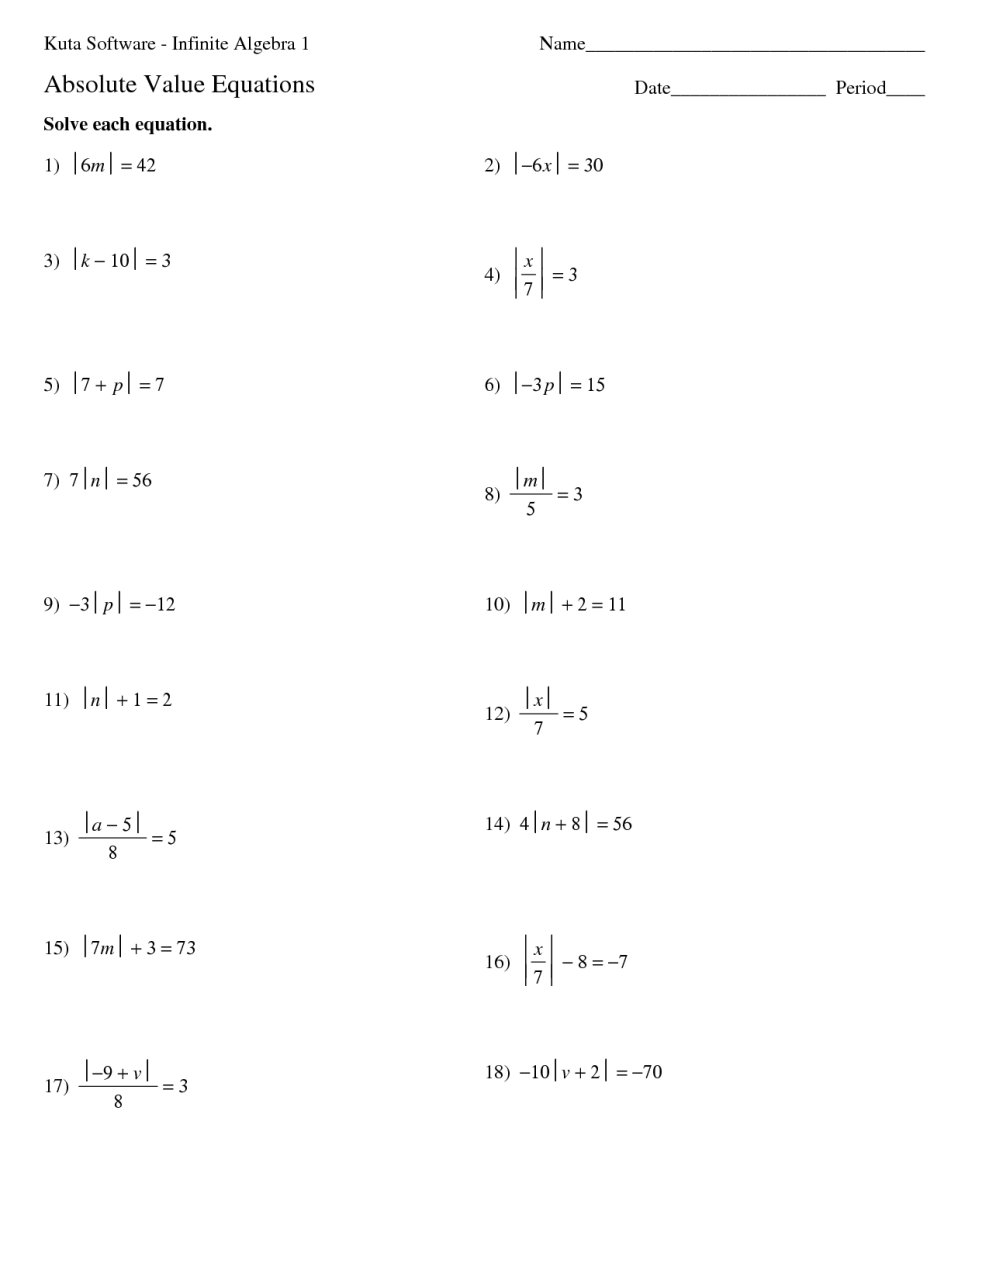 Absolute Value Worksheets For 6th Graders 8 best images of absolute